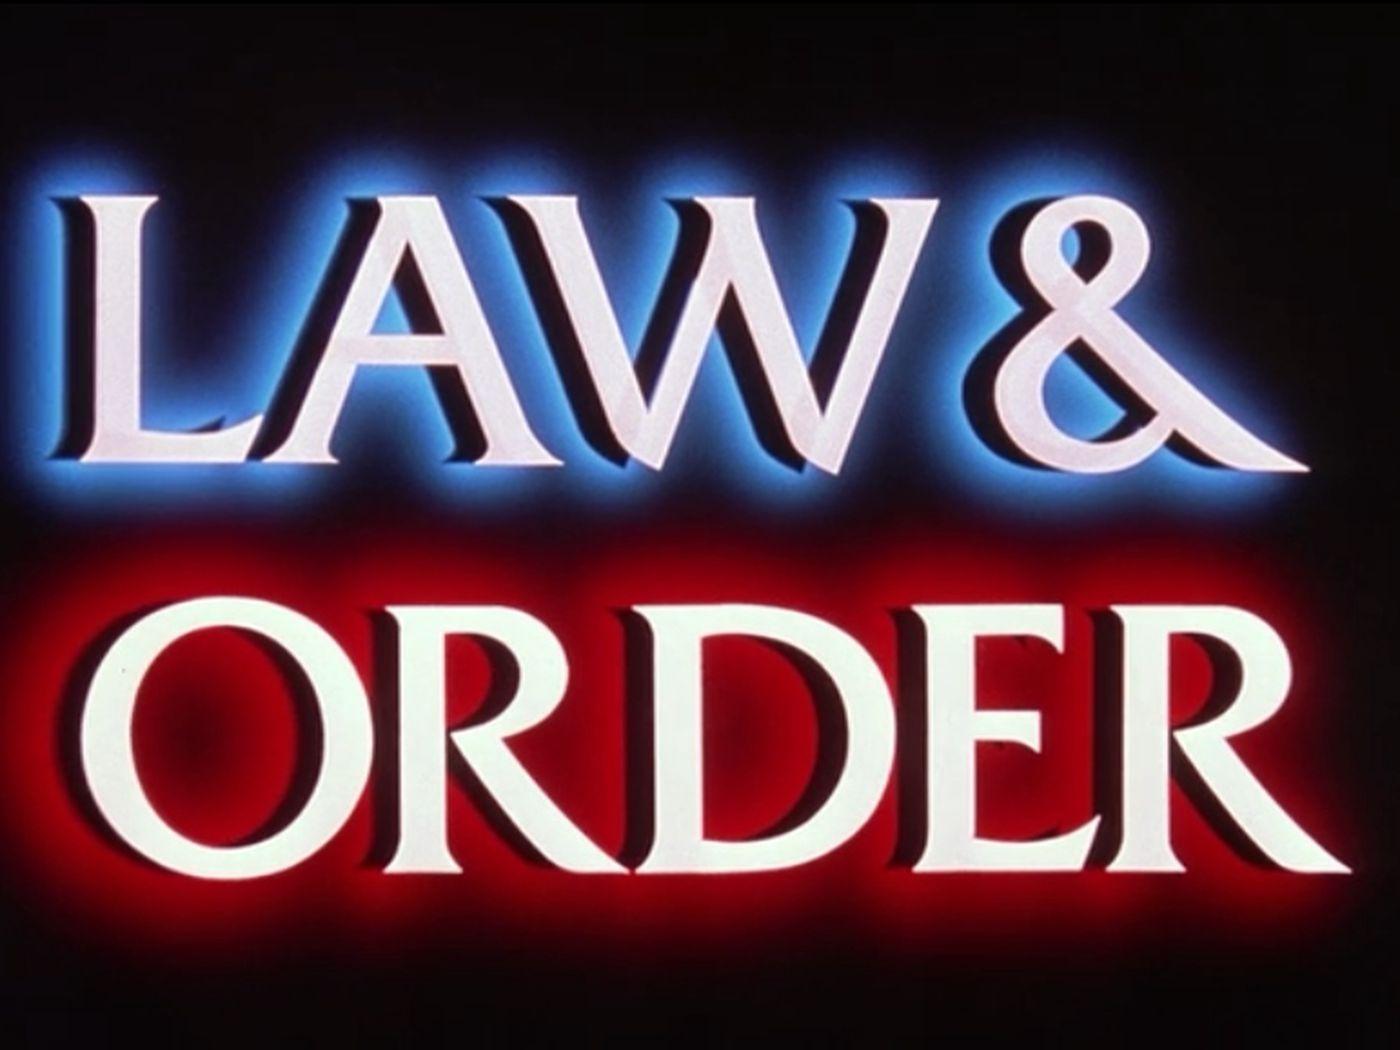 NBC's newest Law & Order spinoff is a true crime anthology series